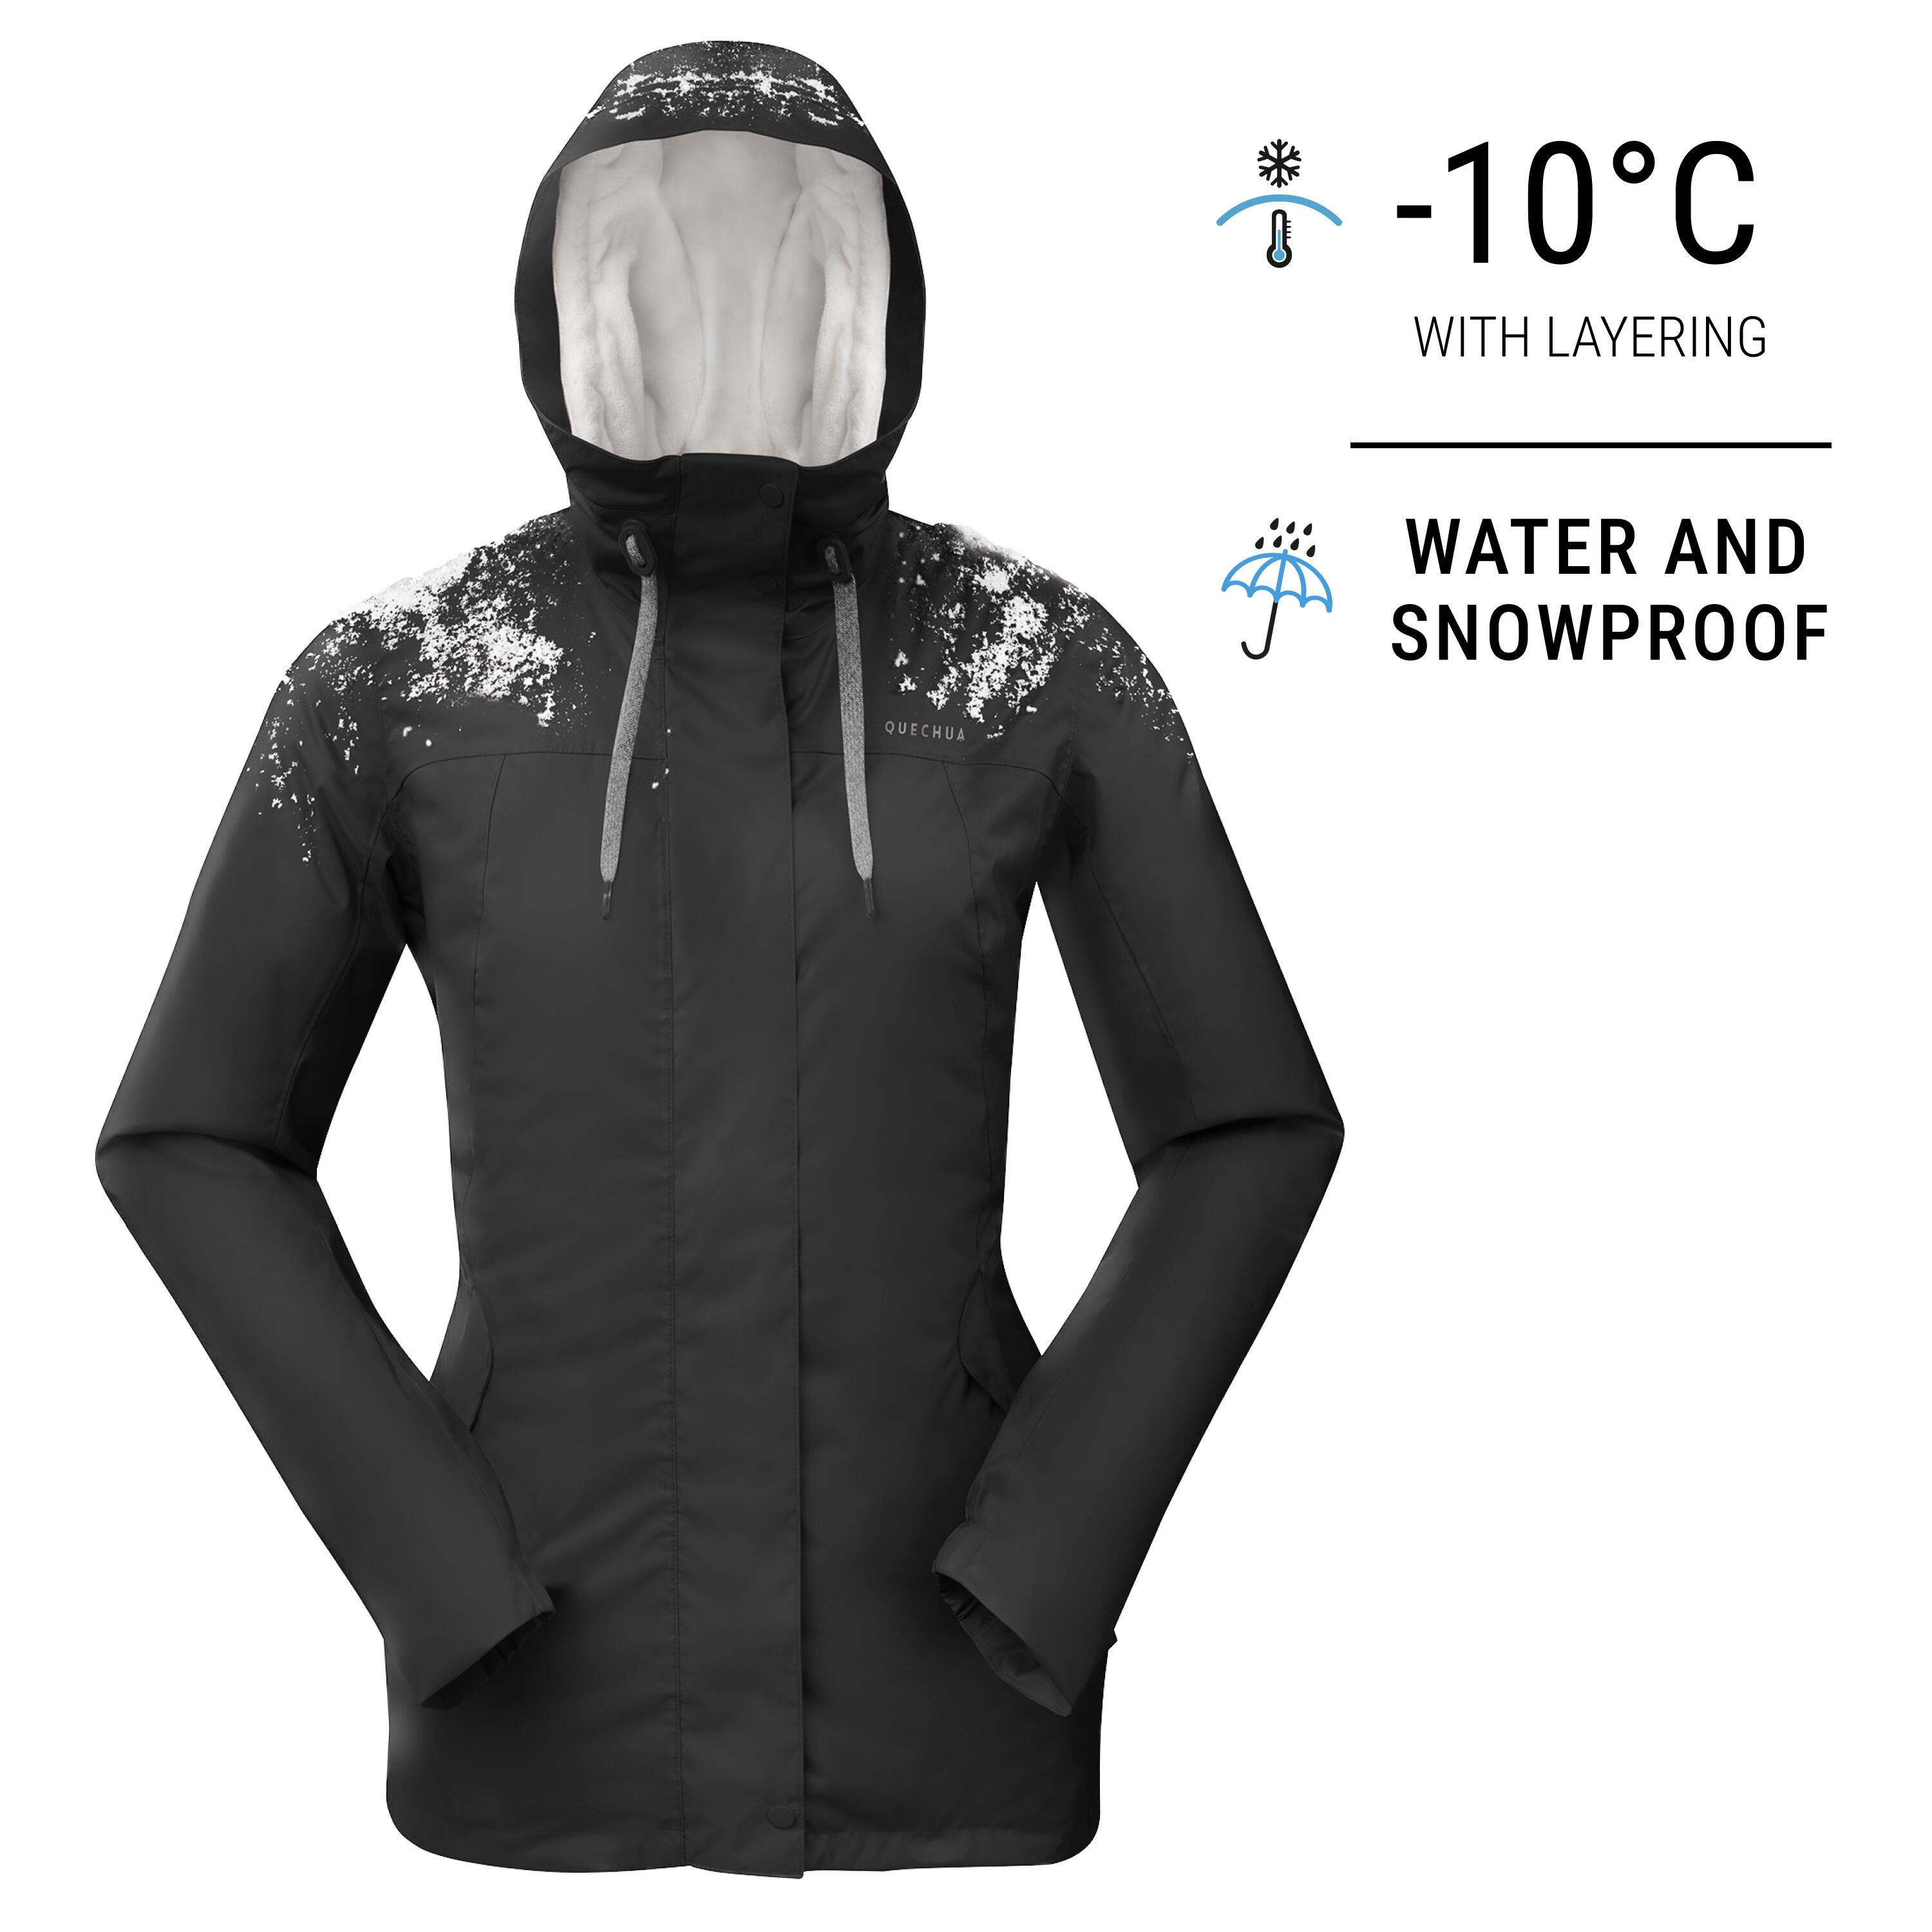 Designer France Mon Quality Winter Puffer Snow Jackets Men For Men And  Women Windproof, Waterproof And Snowproof From Beautiful_stuff, $60.76 |  DHgate.Com